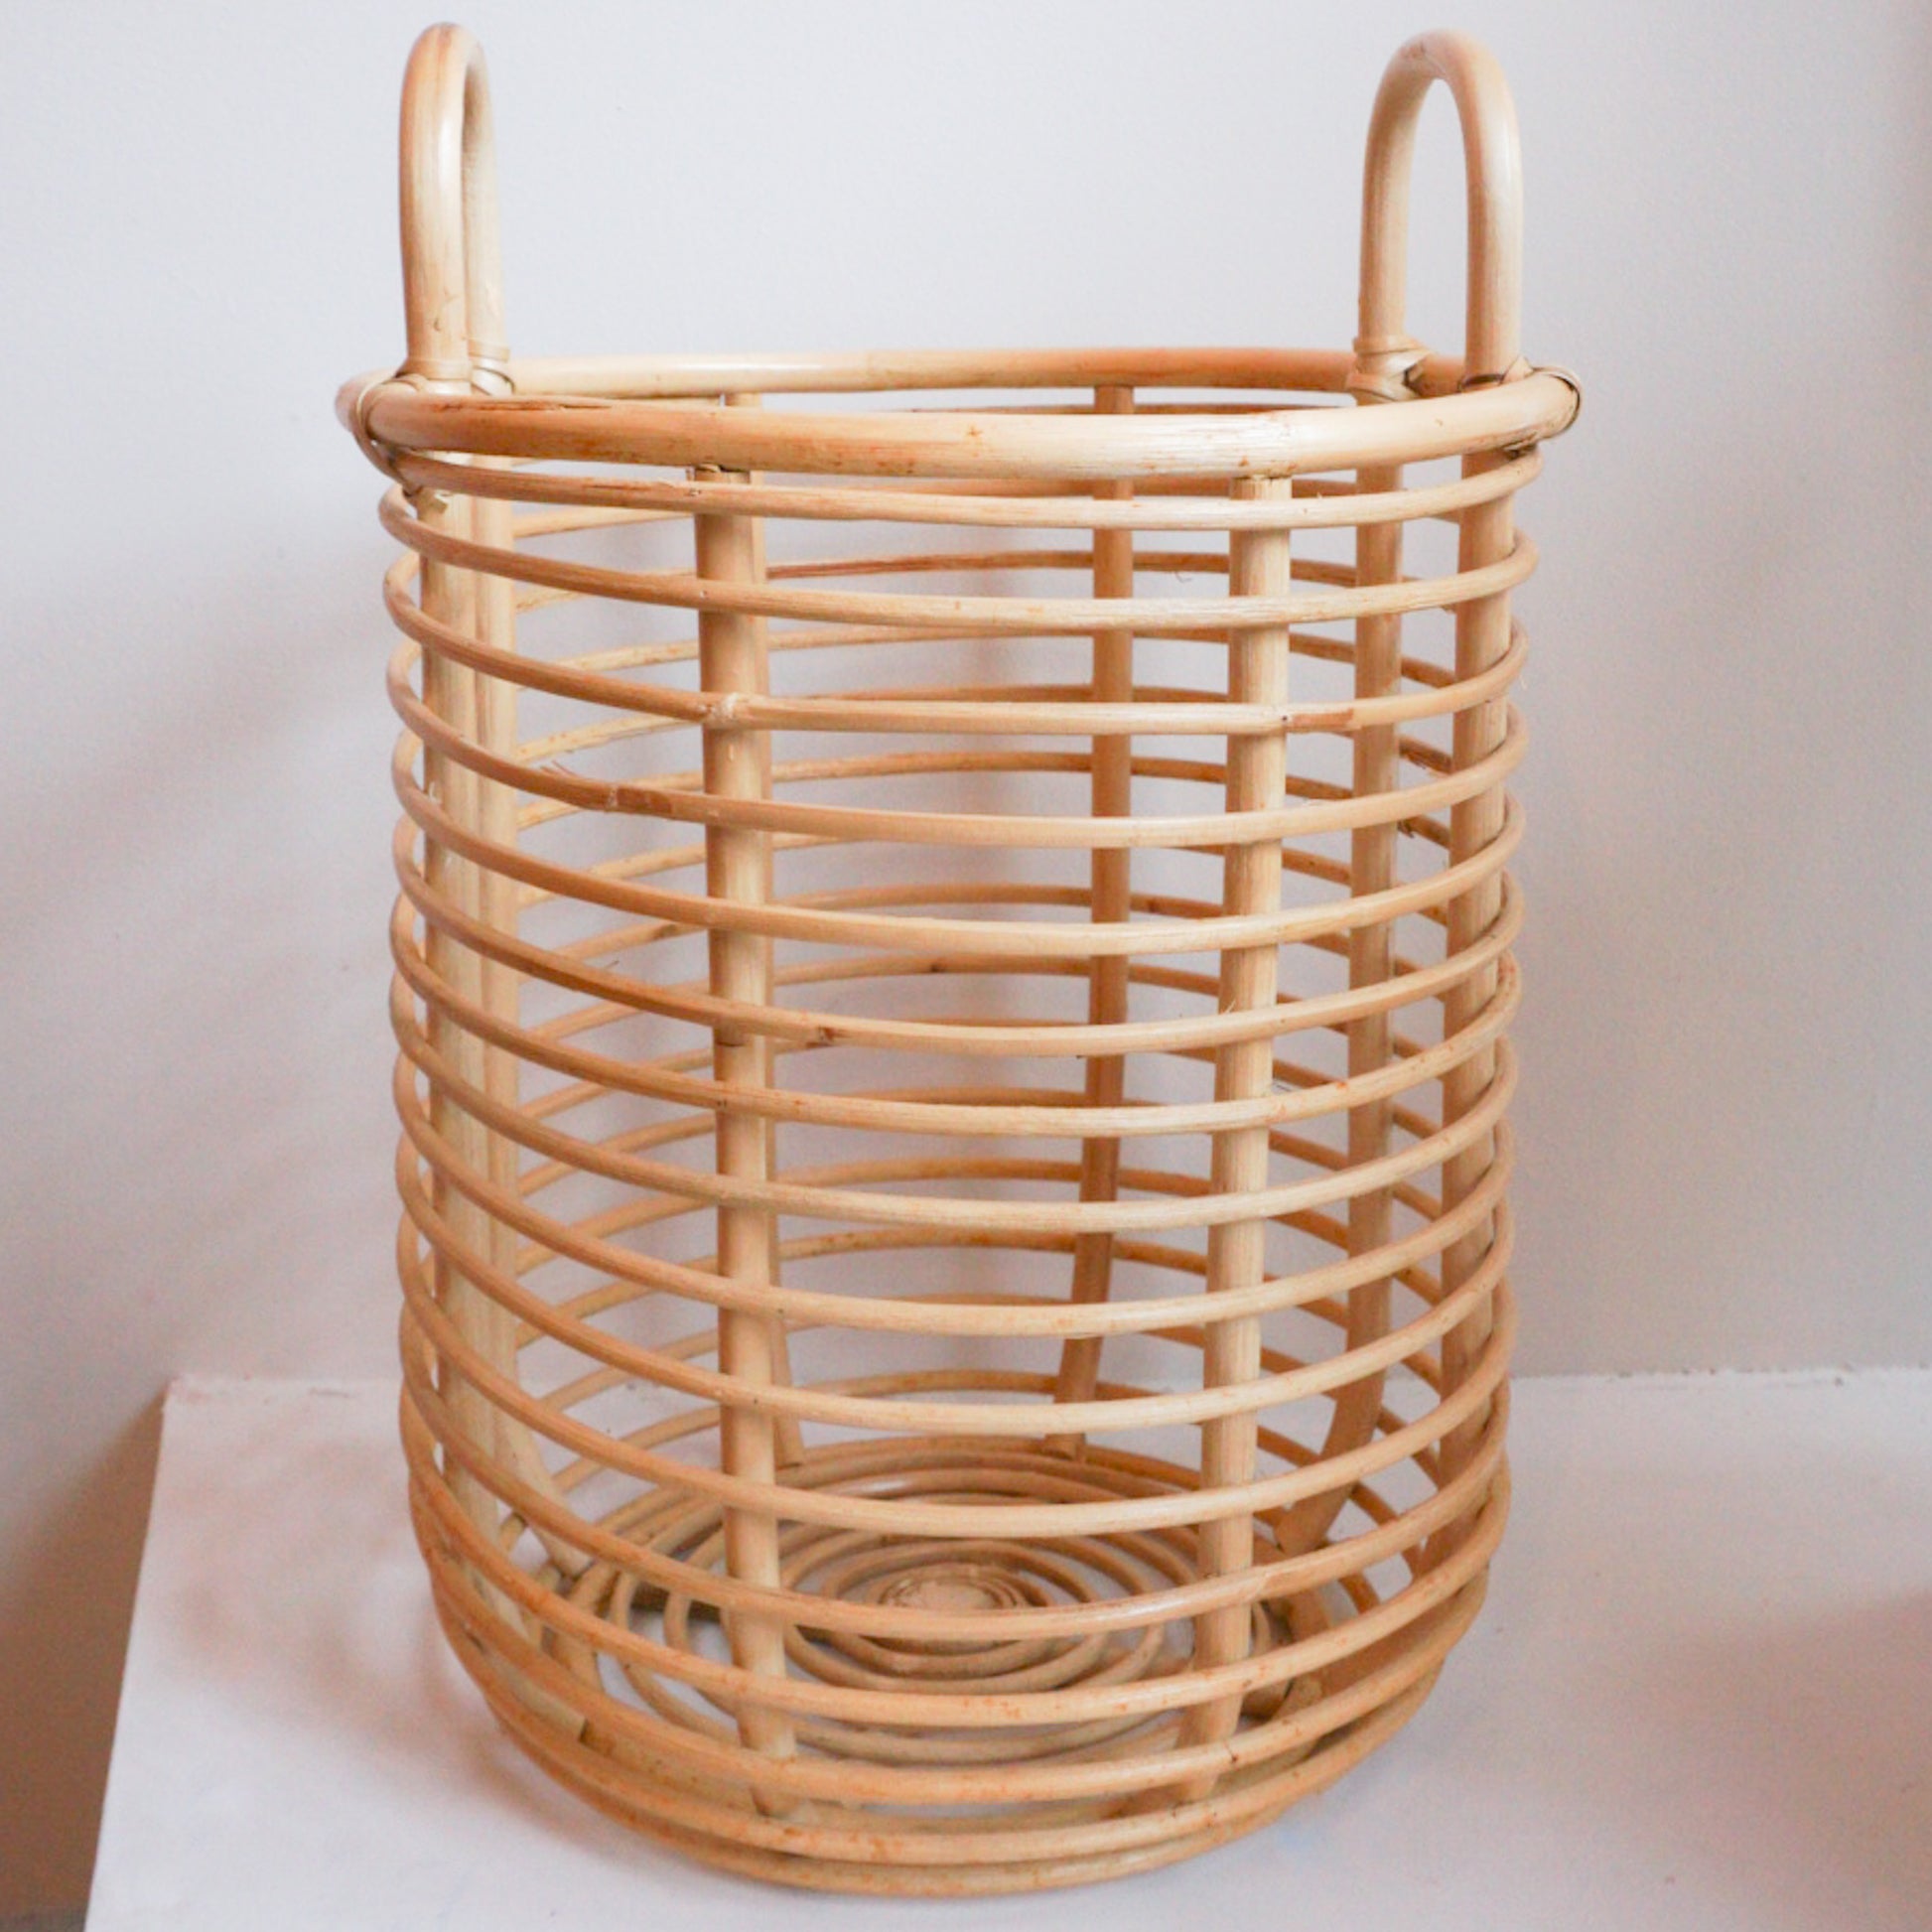 Large round rattan basket with handles for storage